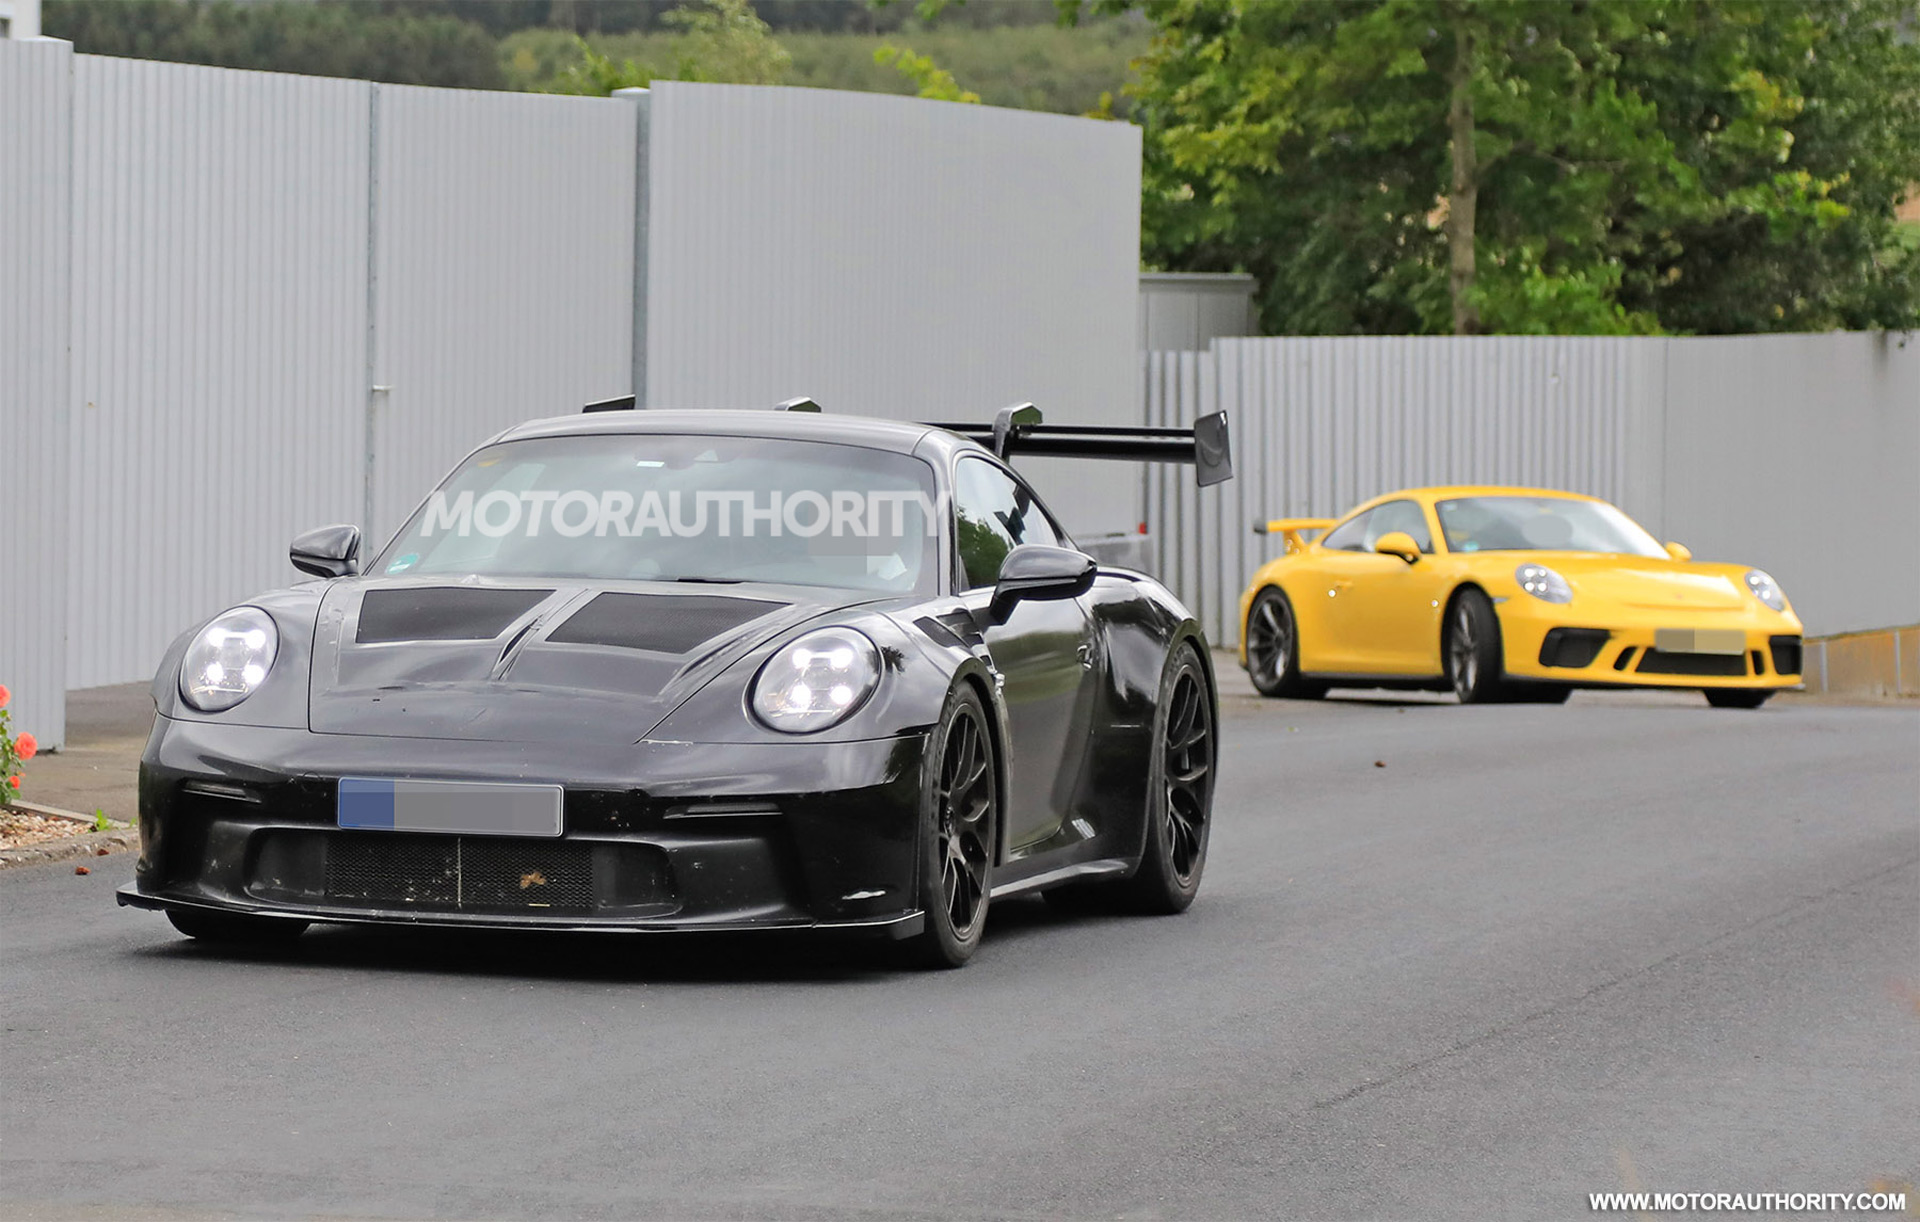 23 Porsche 911 Gt3 Rs Spy Shots New Track Star Spotted For First Time